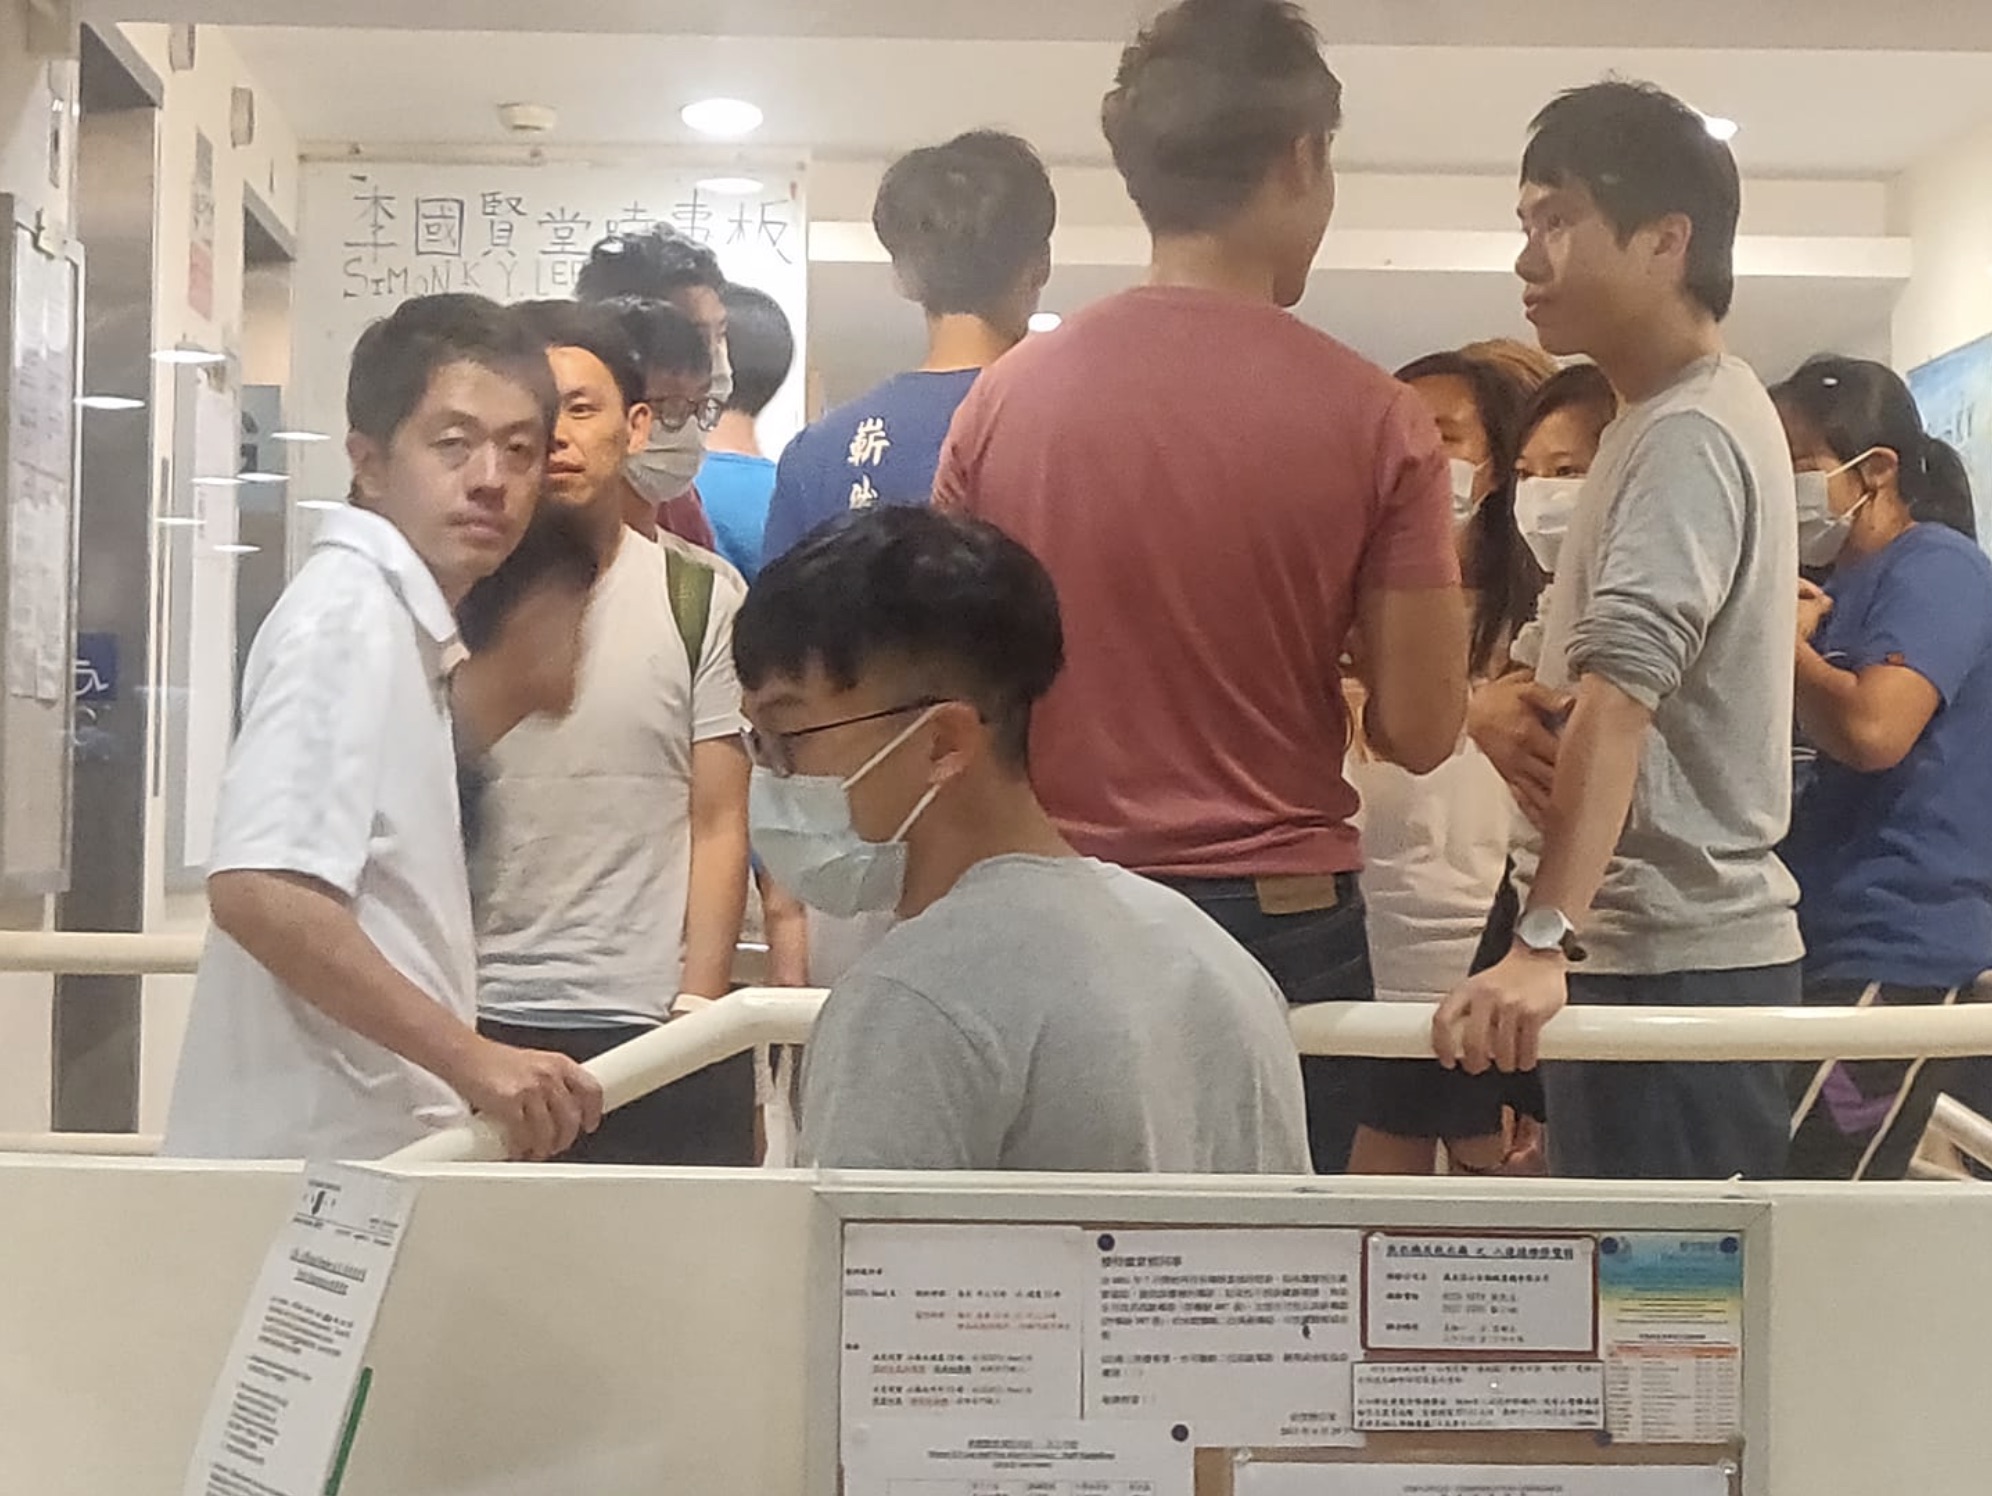 Lawmakers Ted Hui (far left) and Roy Kwong (far right) inside the lobby of the Simon K.Y. Lee Hall at the University of Hong Kong, following reports that police had a search warrant for the dorm, Photo via Facebook/Campus TV.